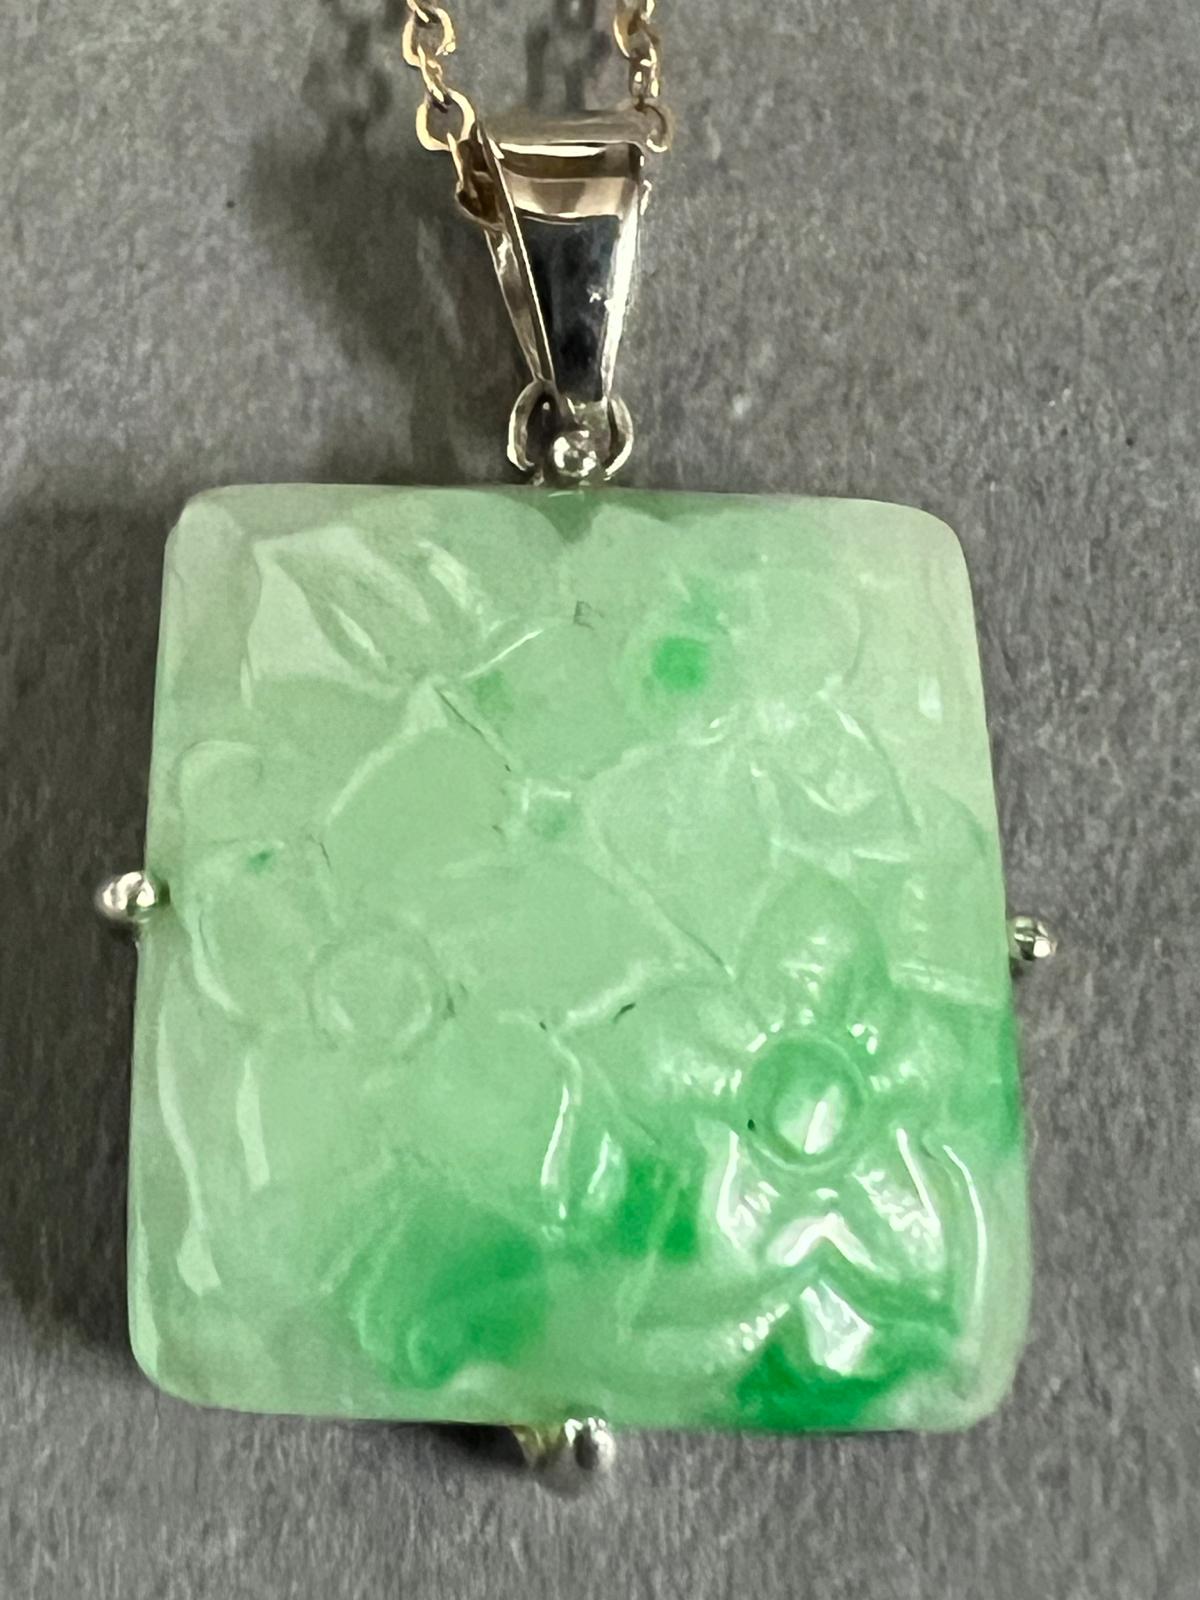 A square jade pendant on a 9ct gold necklace.